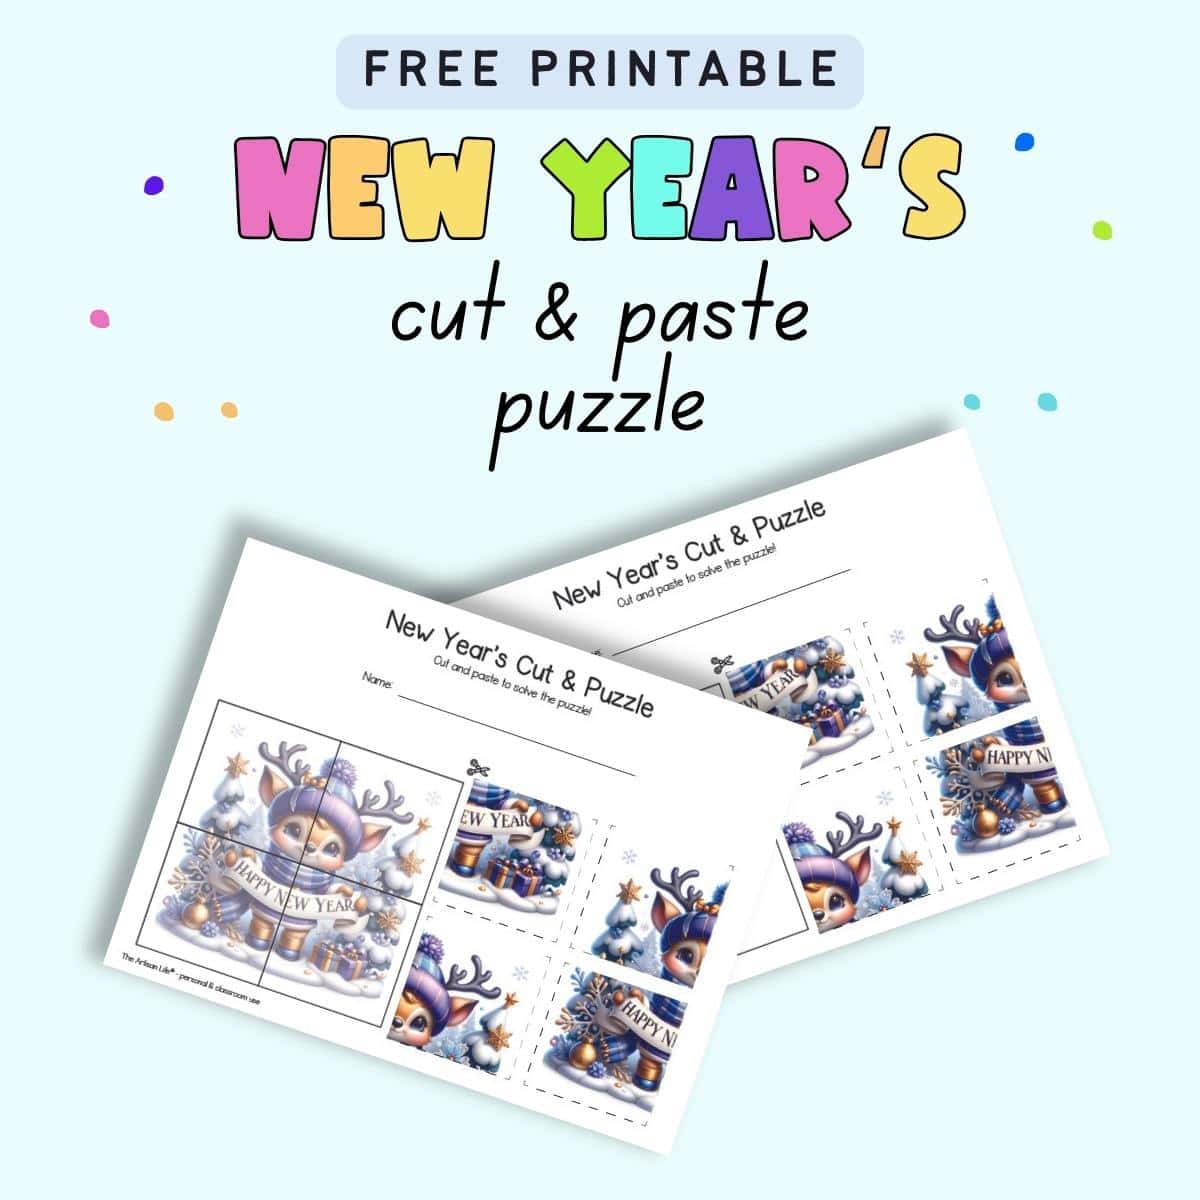 Text "free printable New Year's cut and paste puzzle" with a preview of two four part puzzles with a cute winter deer.